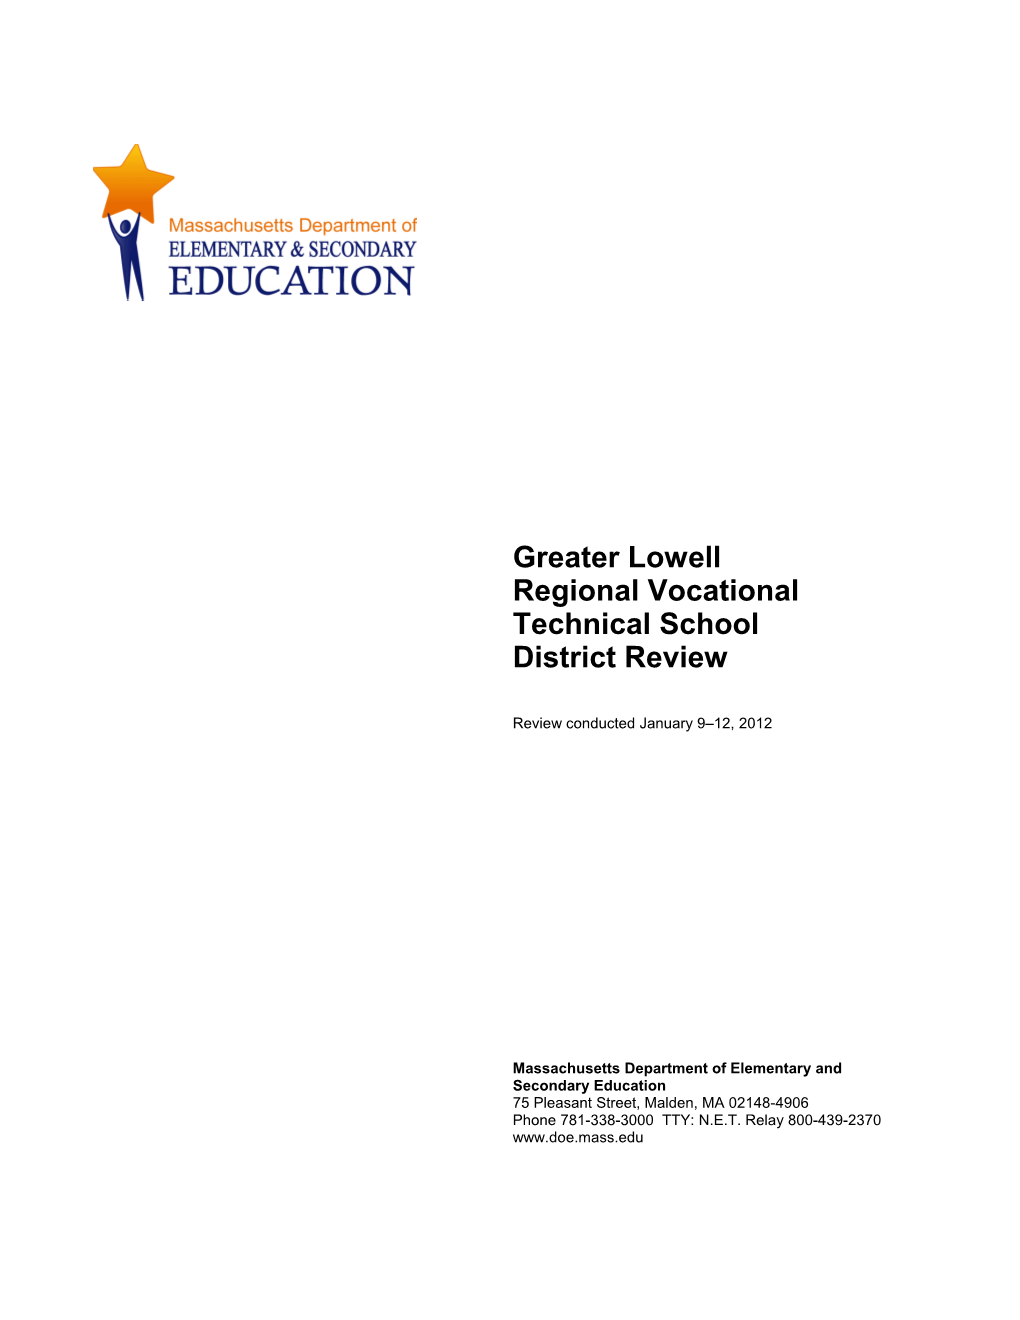 Greater Lowell District Review Report, 2012 Onsite